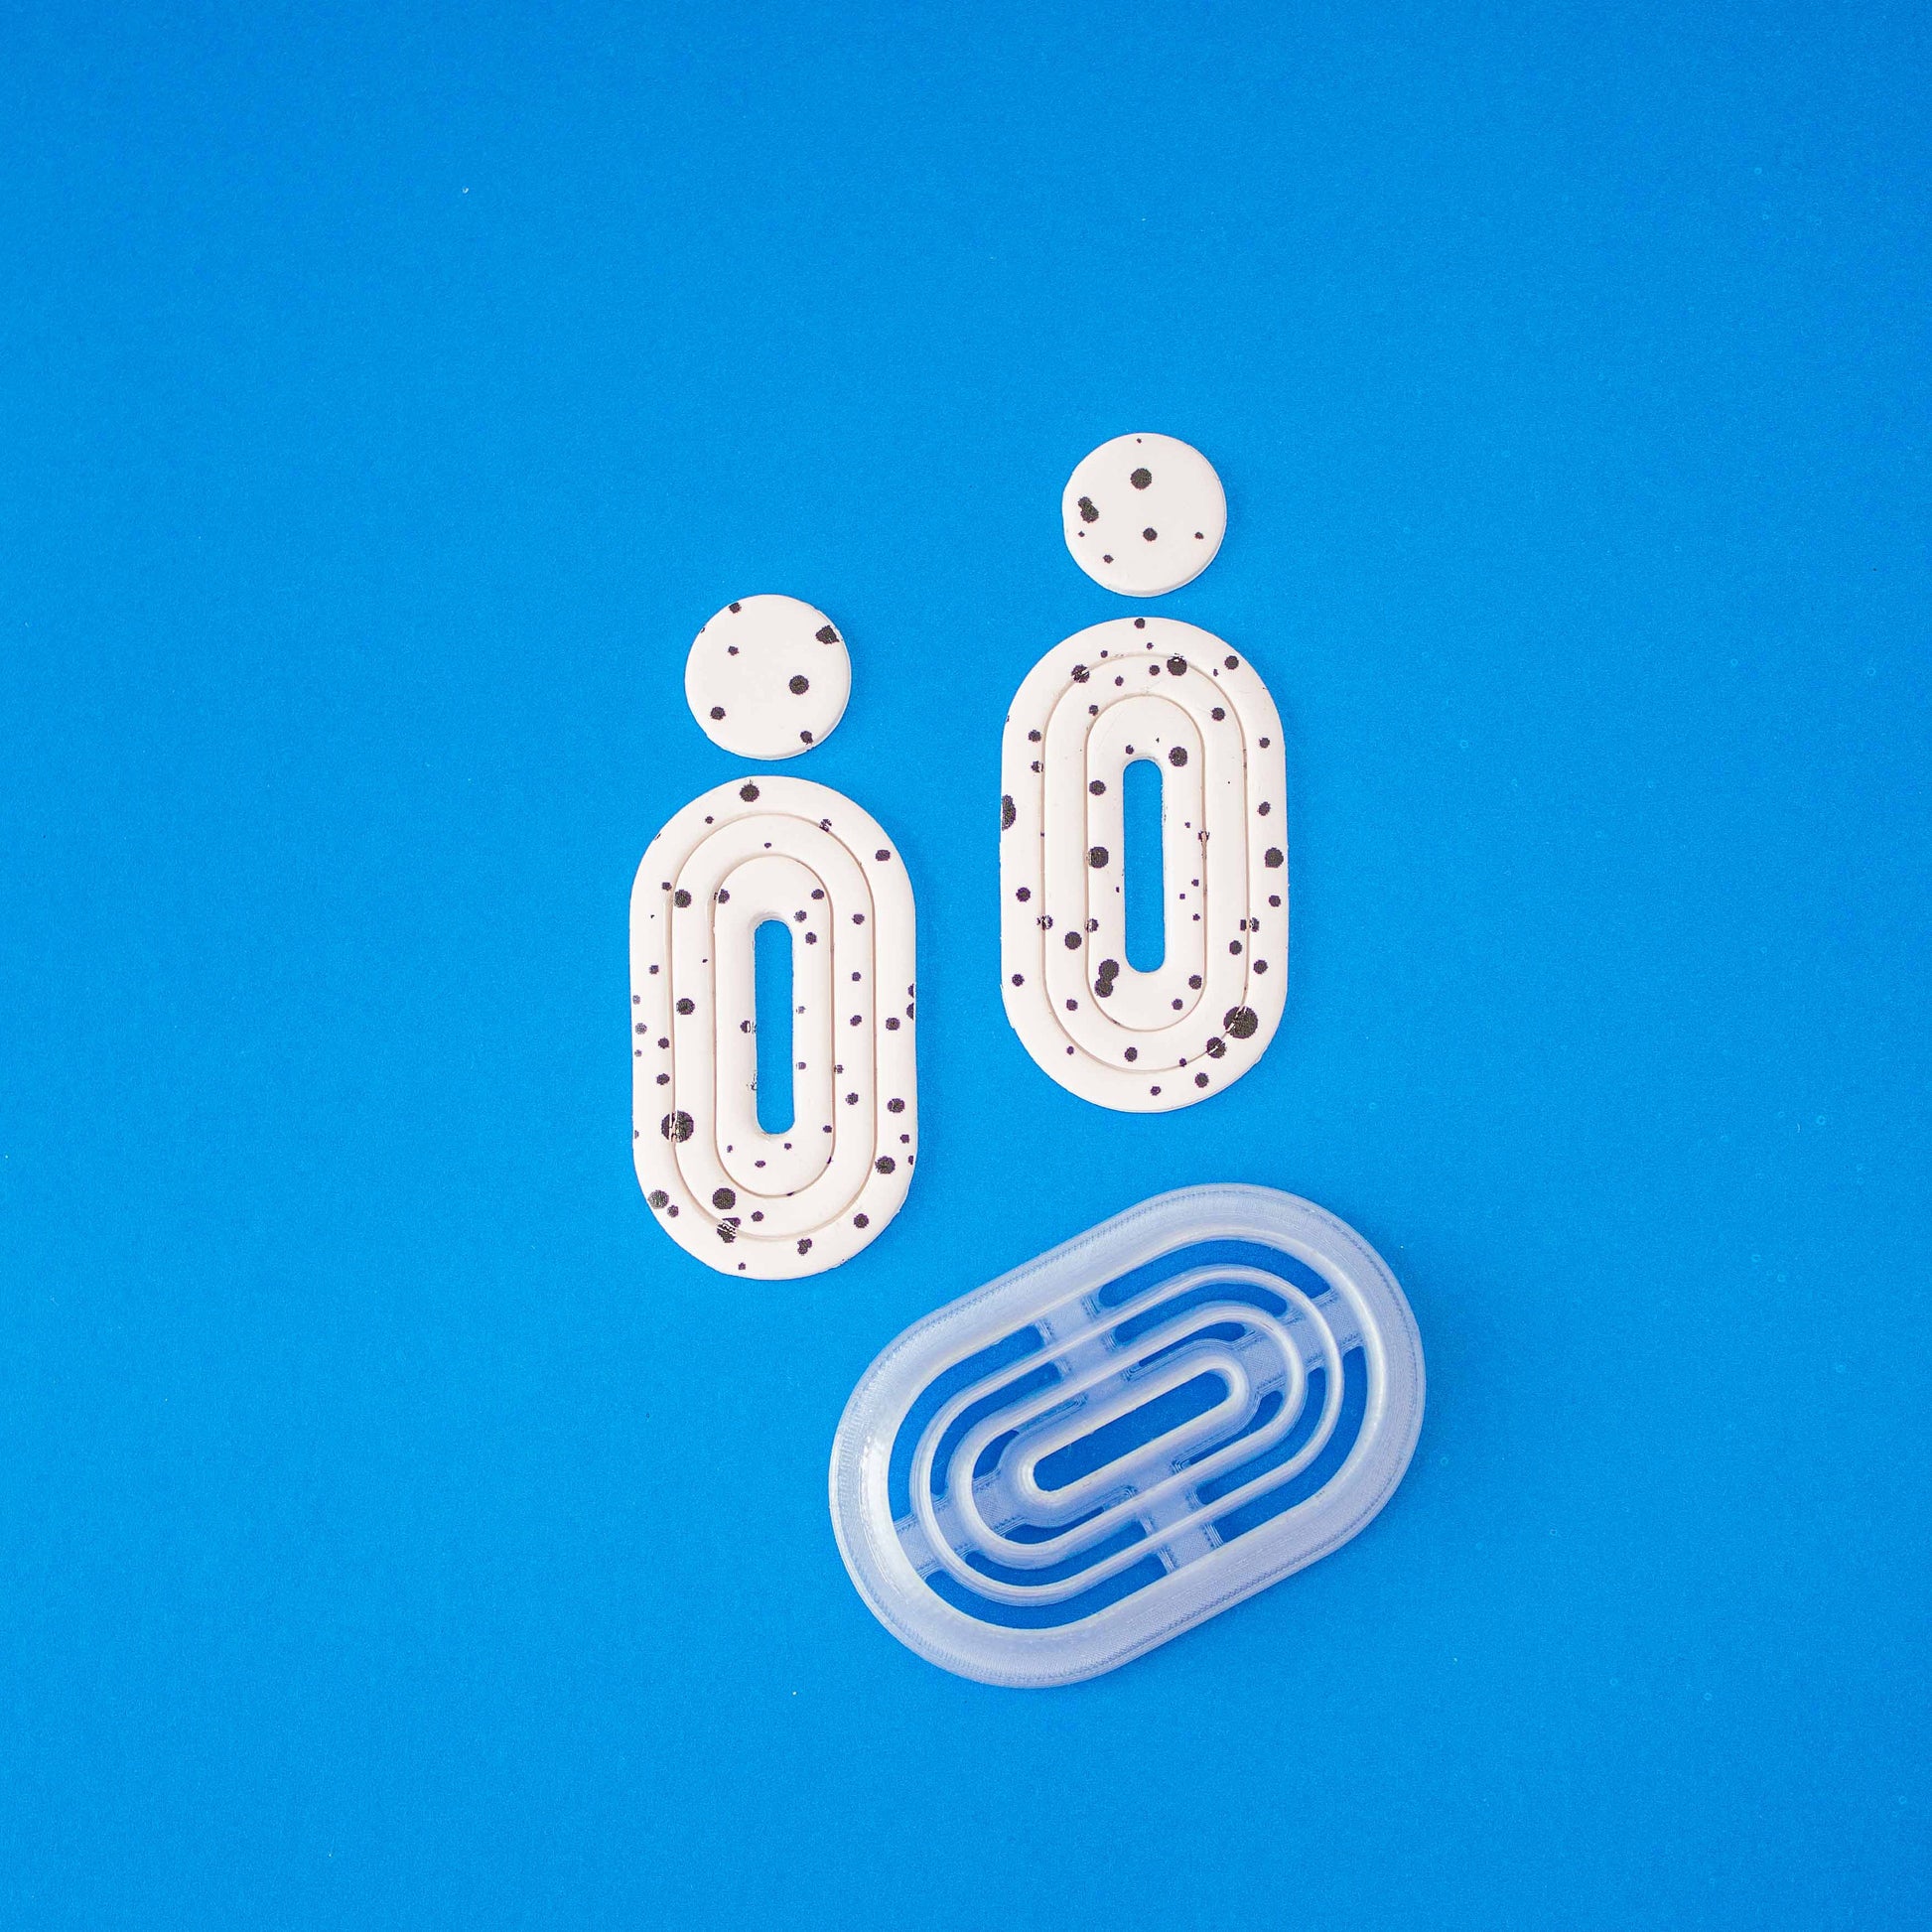 Donut cutter and 2 donut polymer clay earrings on a blue background.